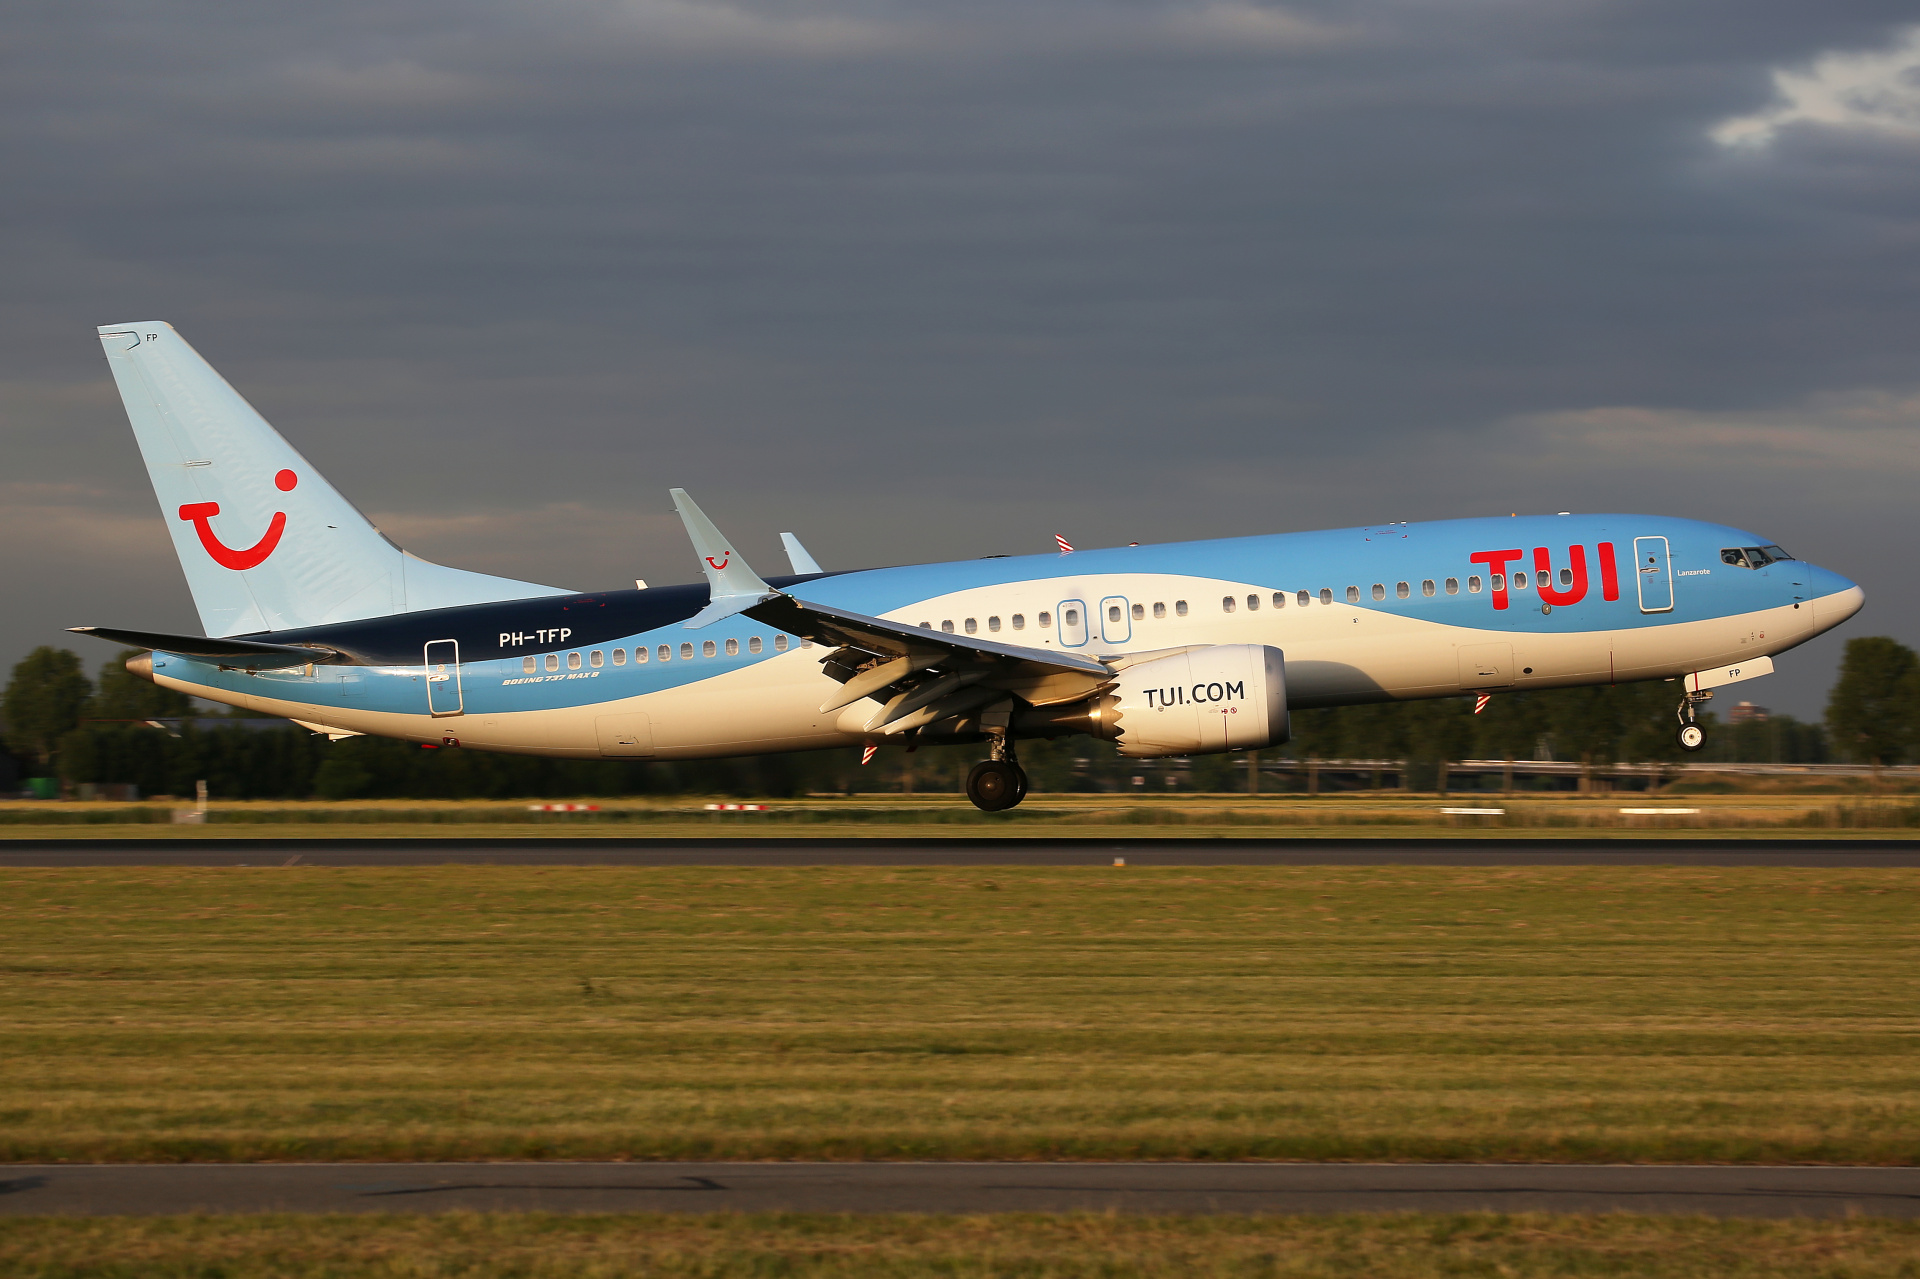 PH-TFP, TUI fly Netherlands (Aircraft » Schiphol Spotting » Boeing 737-8 MAX » TUI fly)